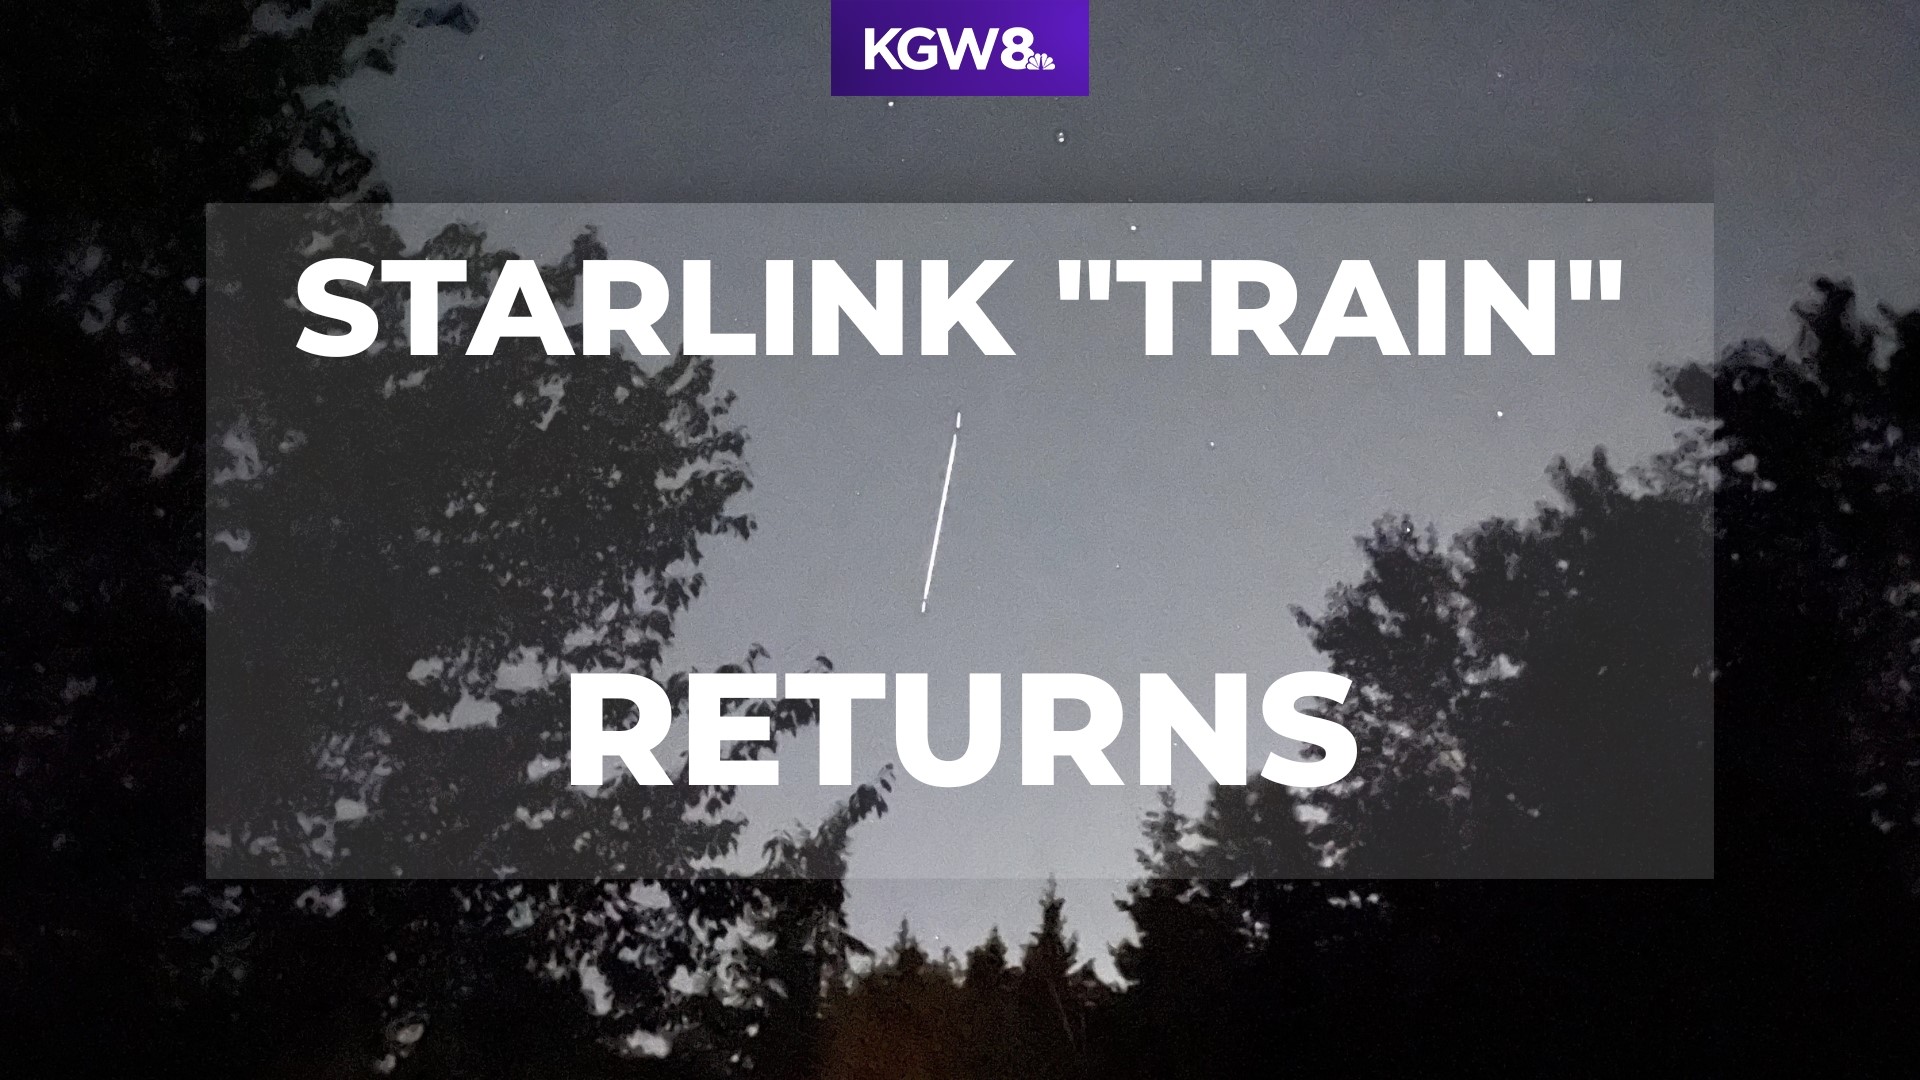 If you haven't caught a glimpse of the Starlink "train" yet, there will be some more chances to see it Monday night and the nights following.